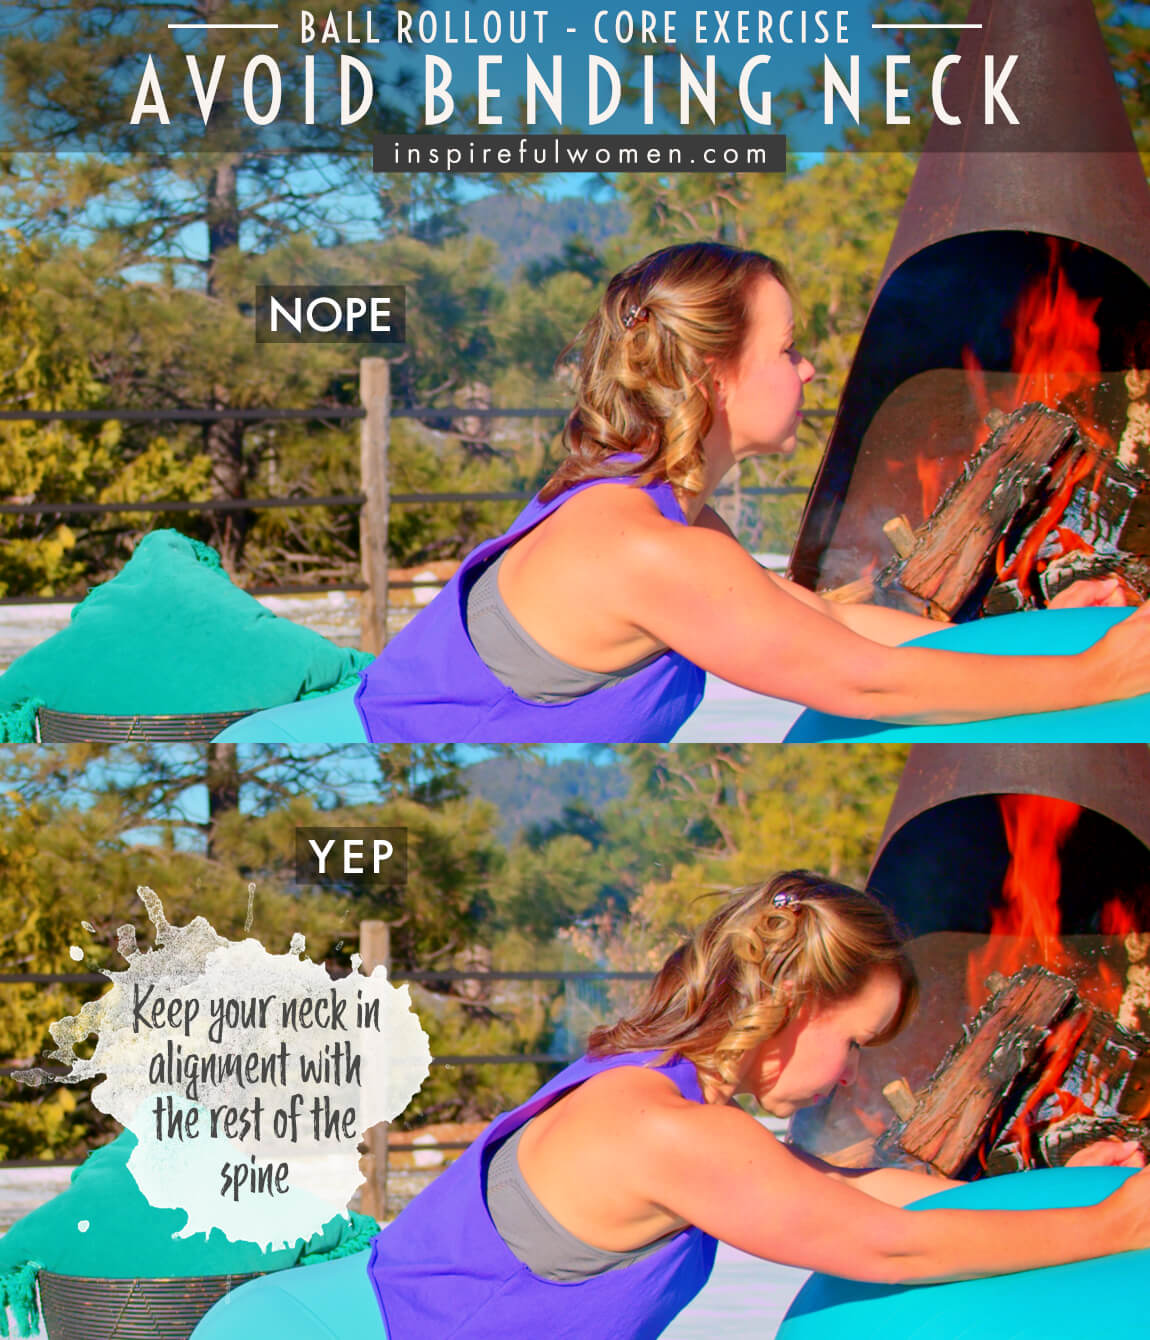 avoid-bending-neck-stability-ball-rollouts-core-exercise-common-mistakes